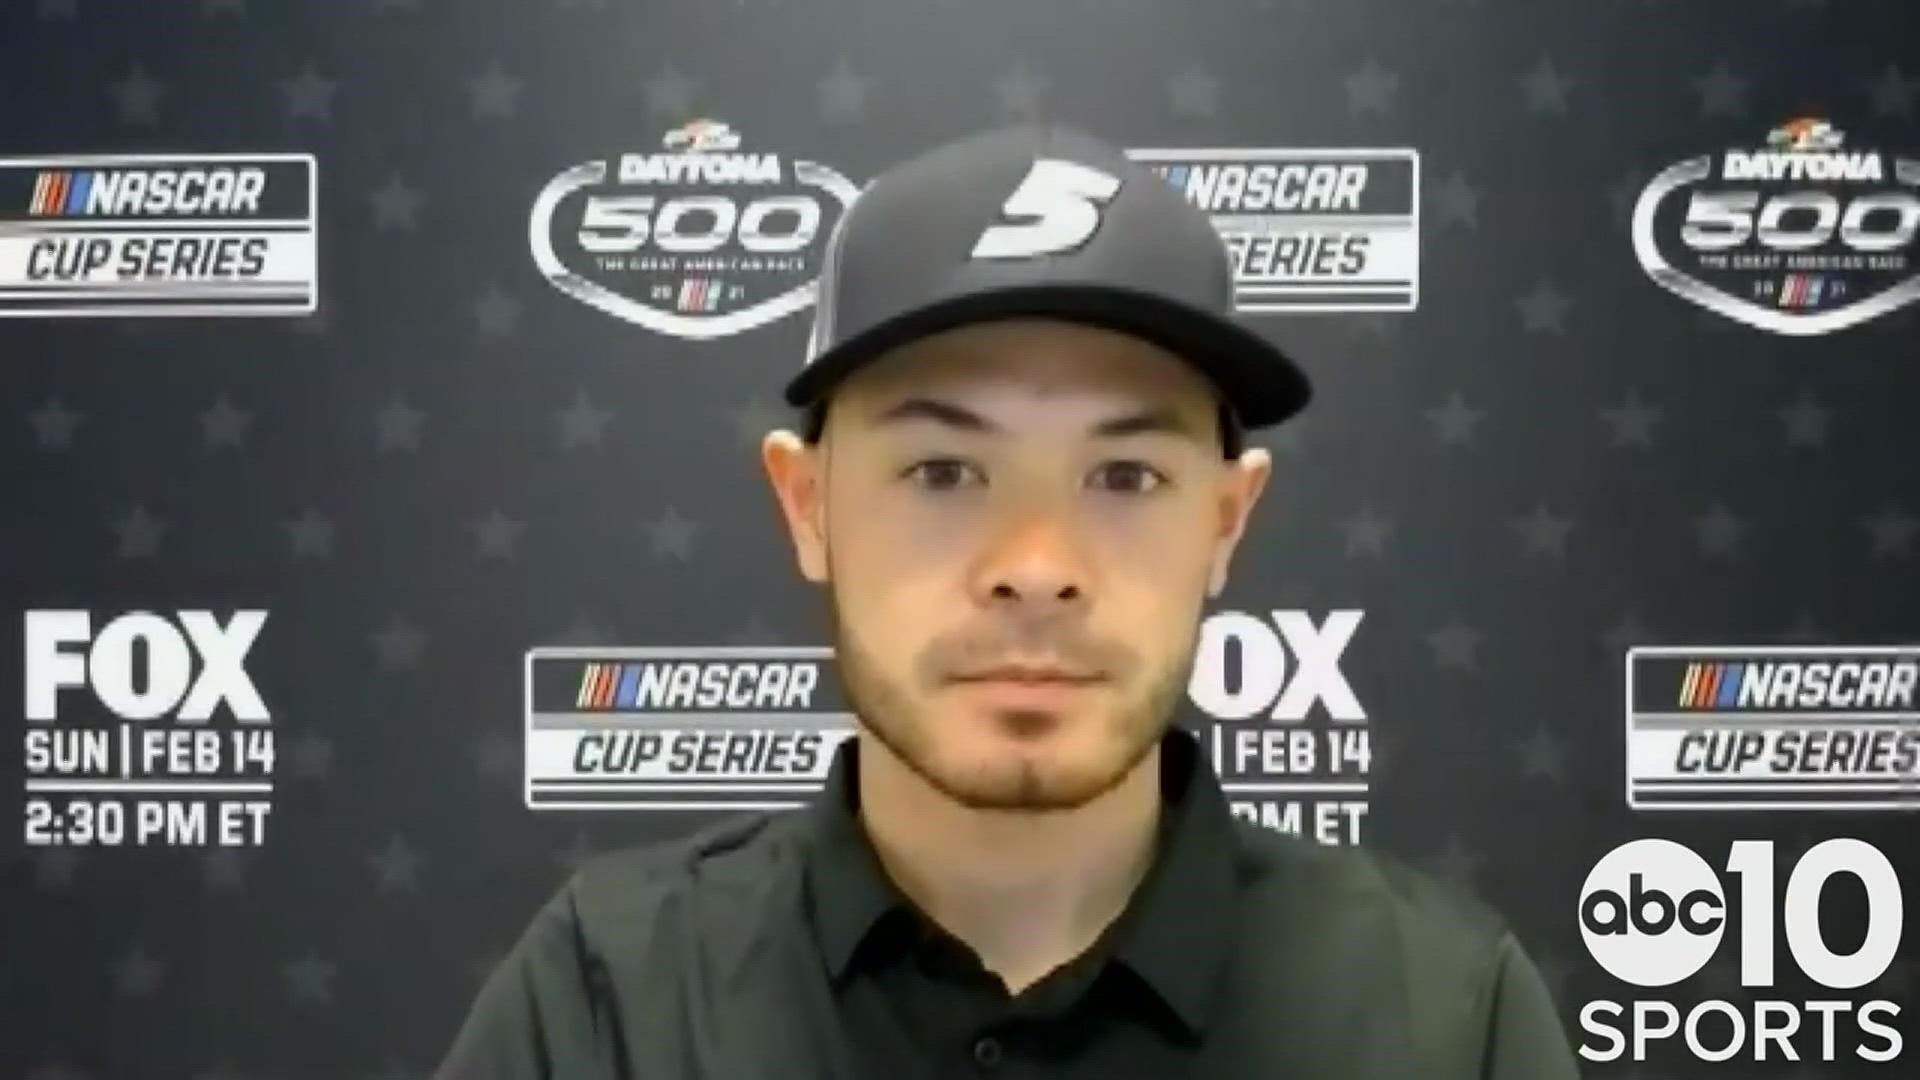 Elk Grove native Kyle Larson on his new opportunity with Hendrick Motorsports & returning to NASCAR following a suspension or using a racial slur last year.